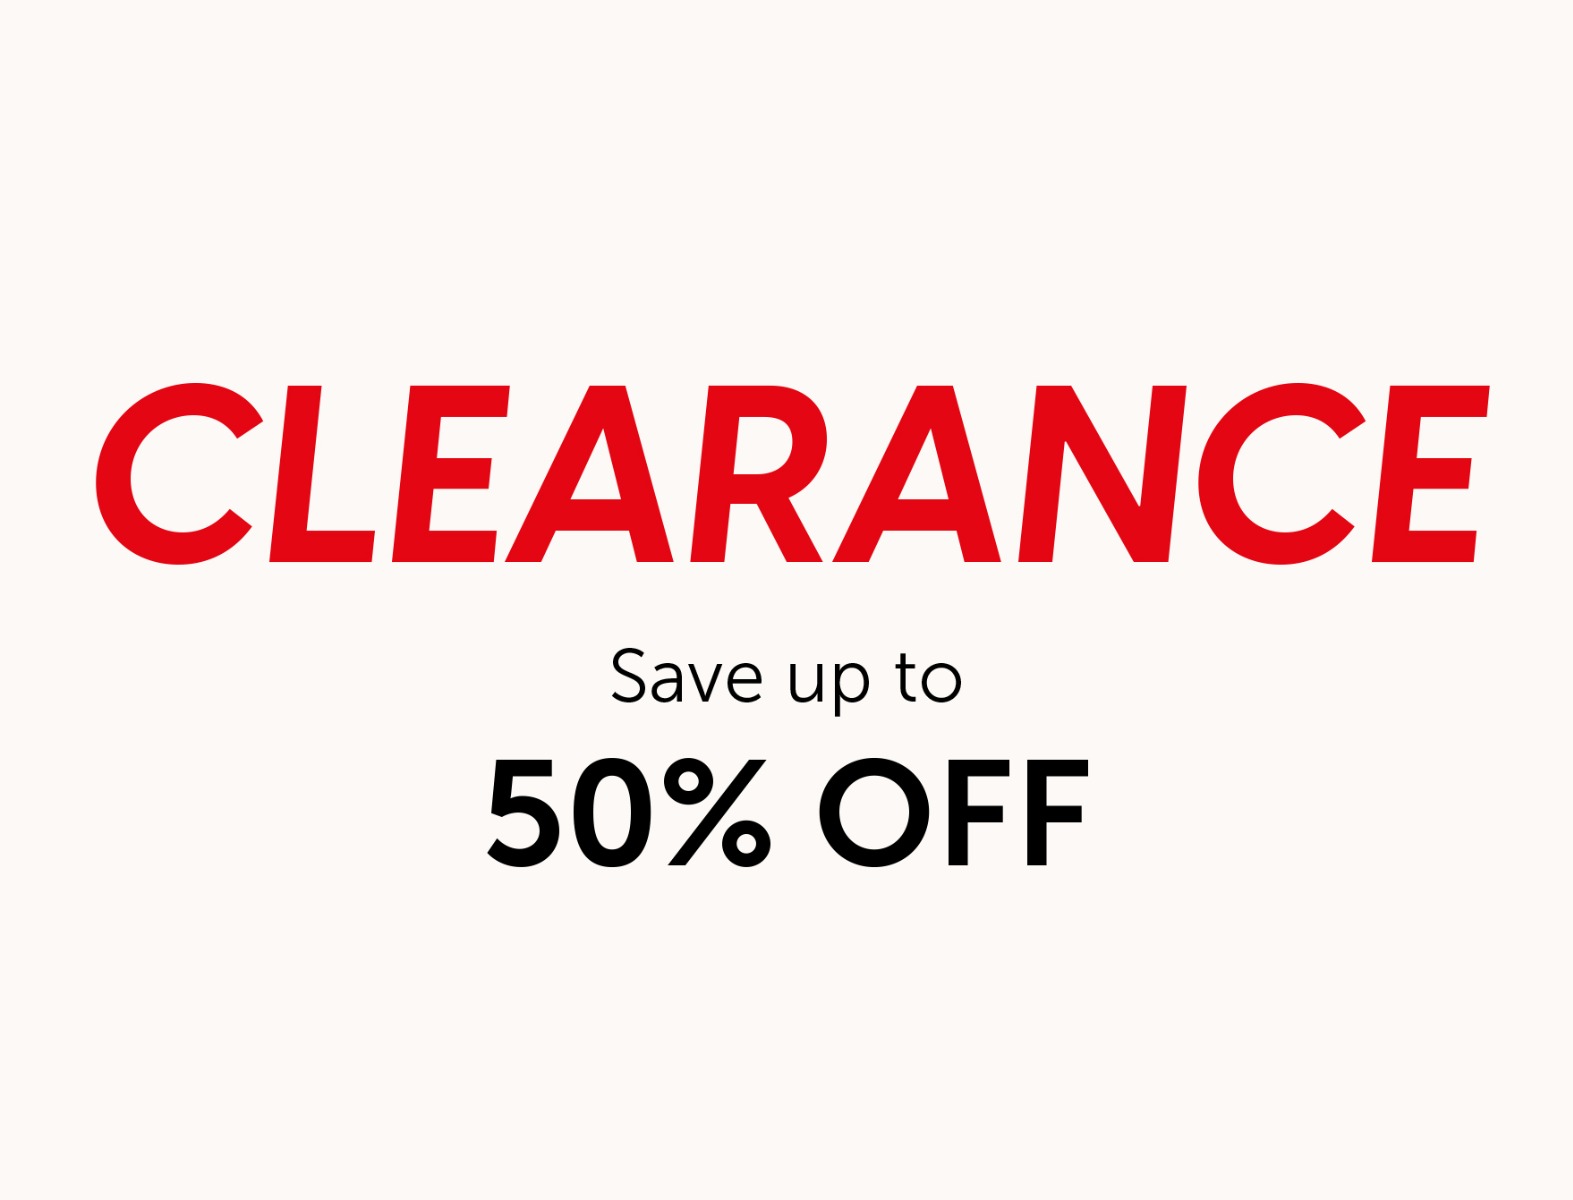 Save up to 50% off!